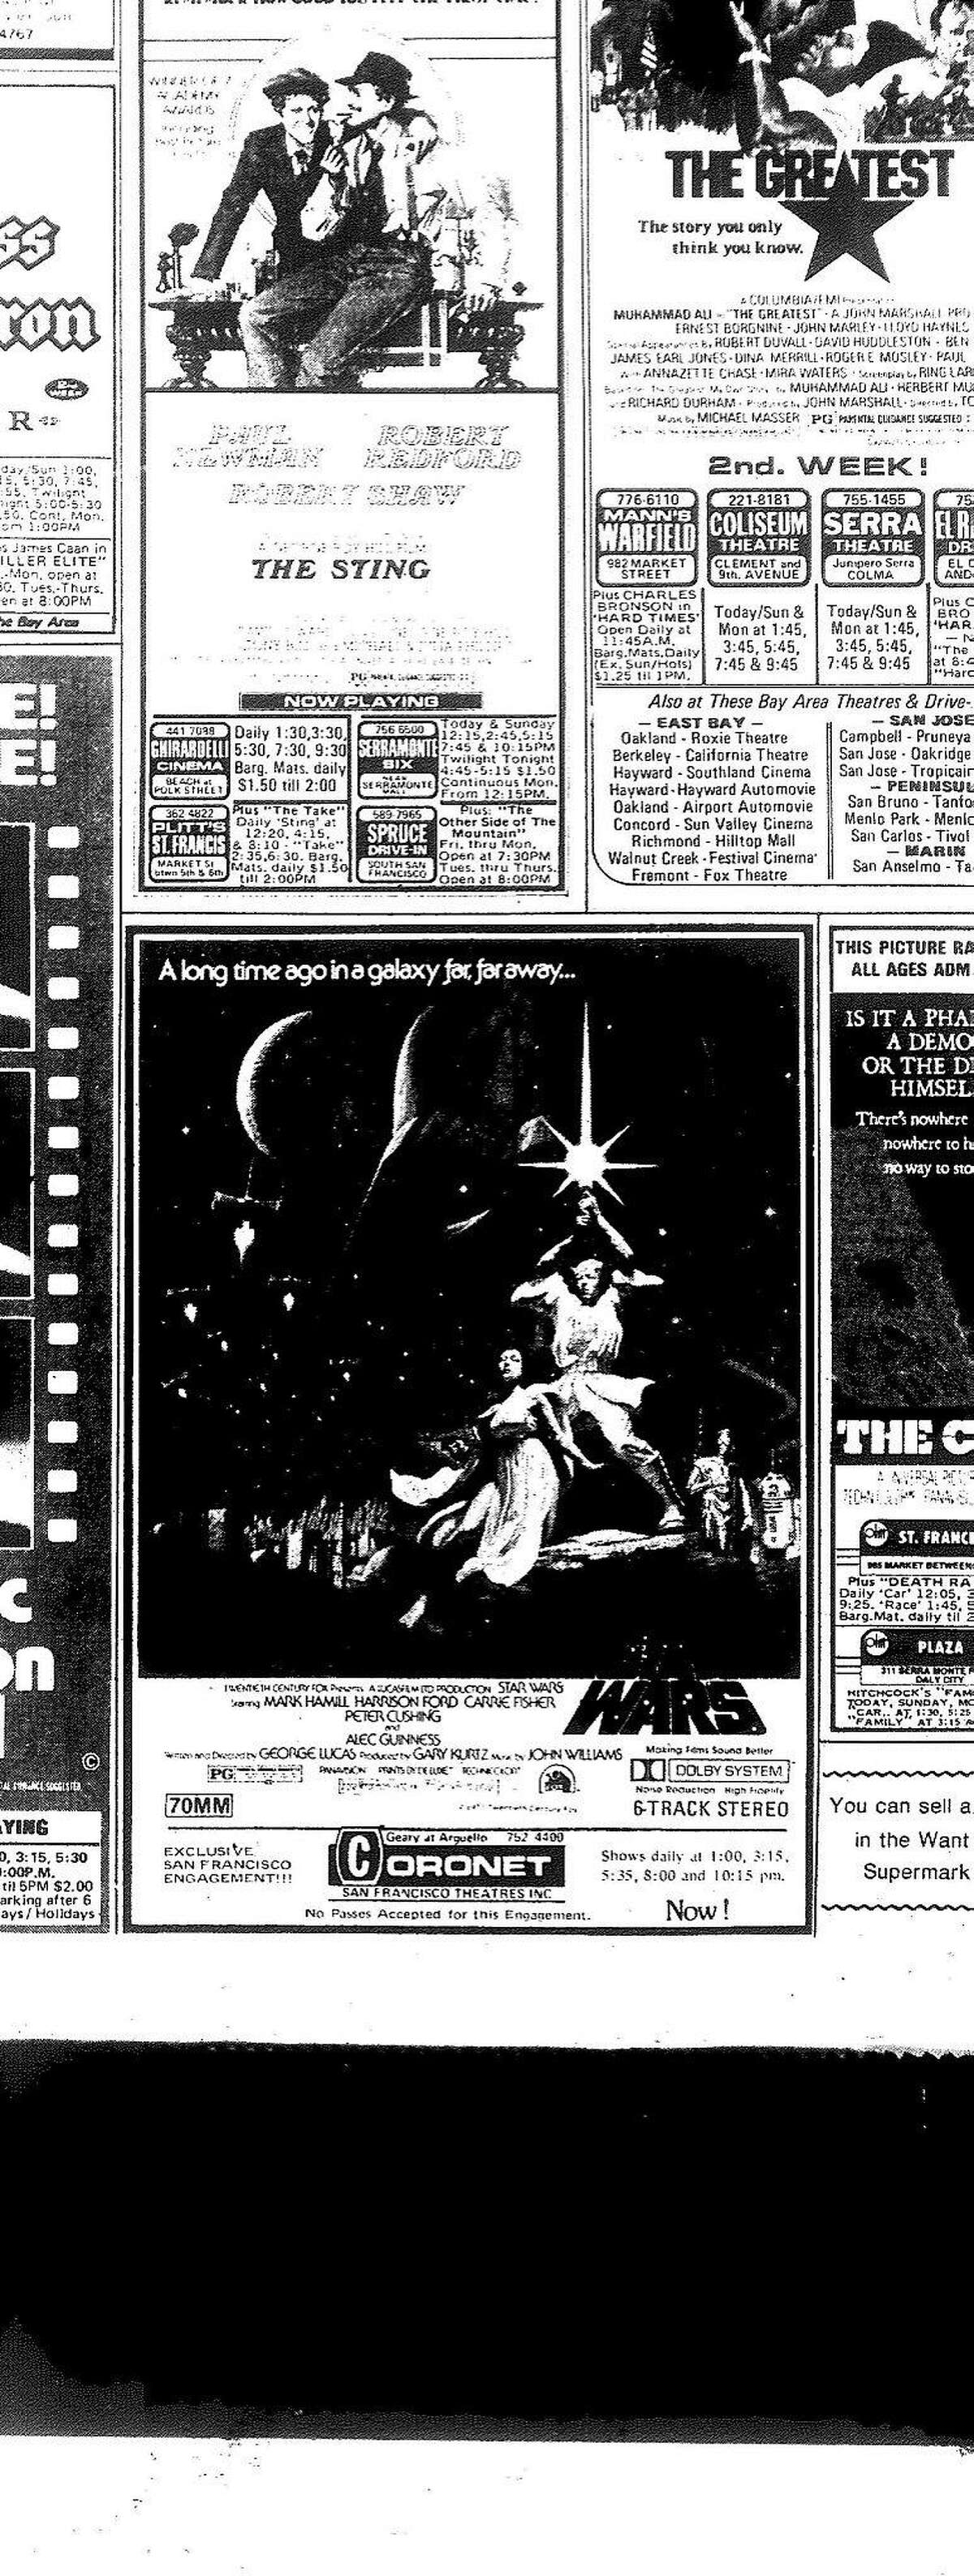 The ad for "Star Wars" in the San Francisco Chronicle as it appeared on Friday May 27, two days after opening at the Coronet.